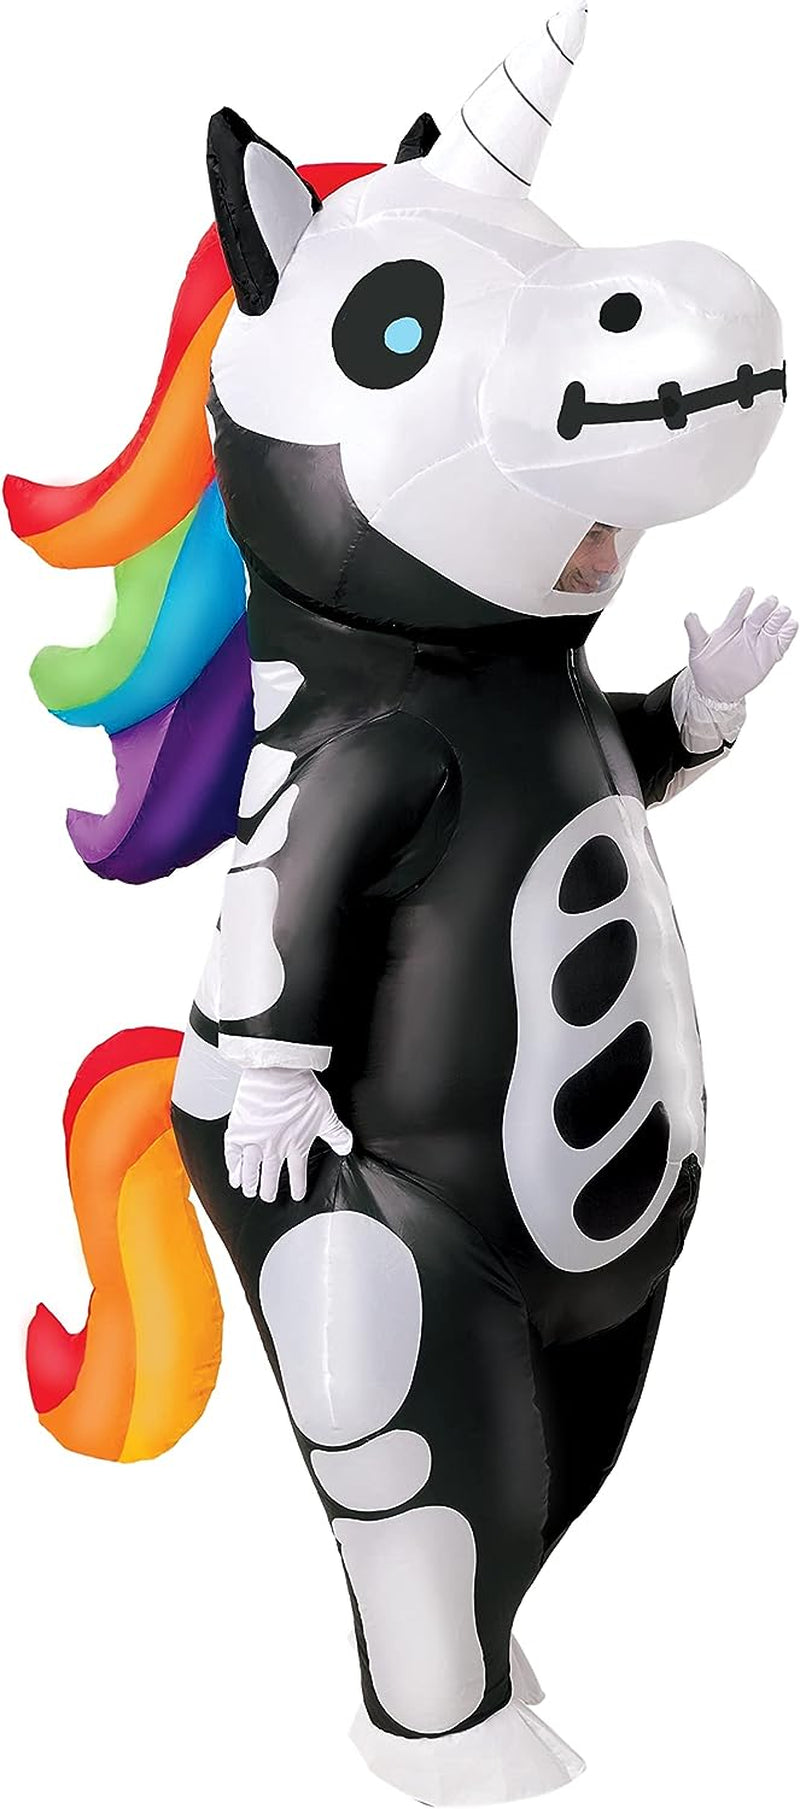 Spooktacular Creations Inflatable Costume Full Body Unicorn Air Blow-Up Deluxe Halloween Costume - Adult Size  Spooktacular Creations Skeleton  